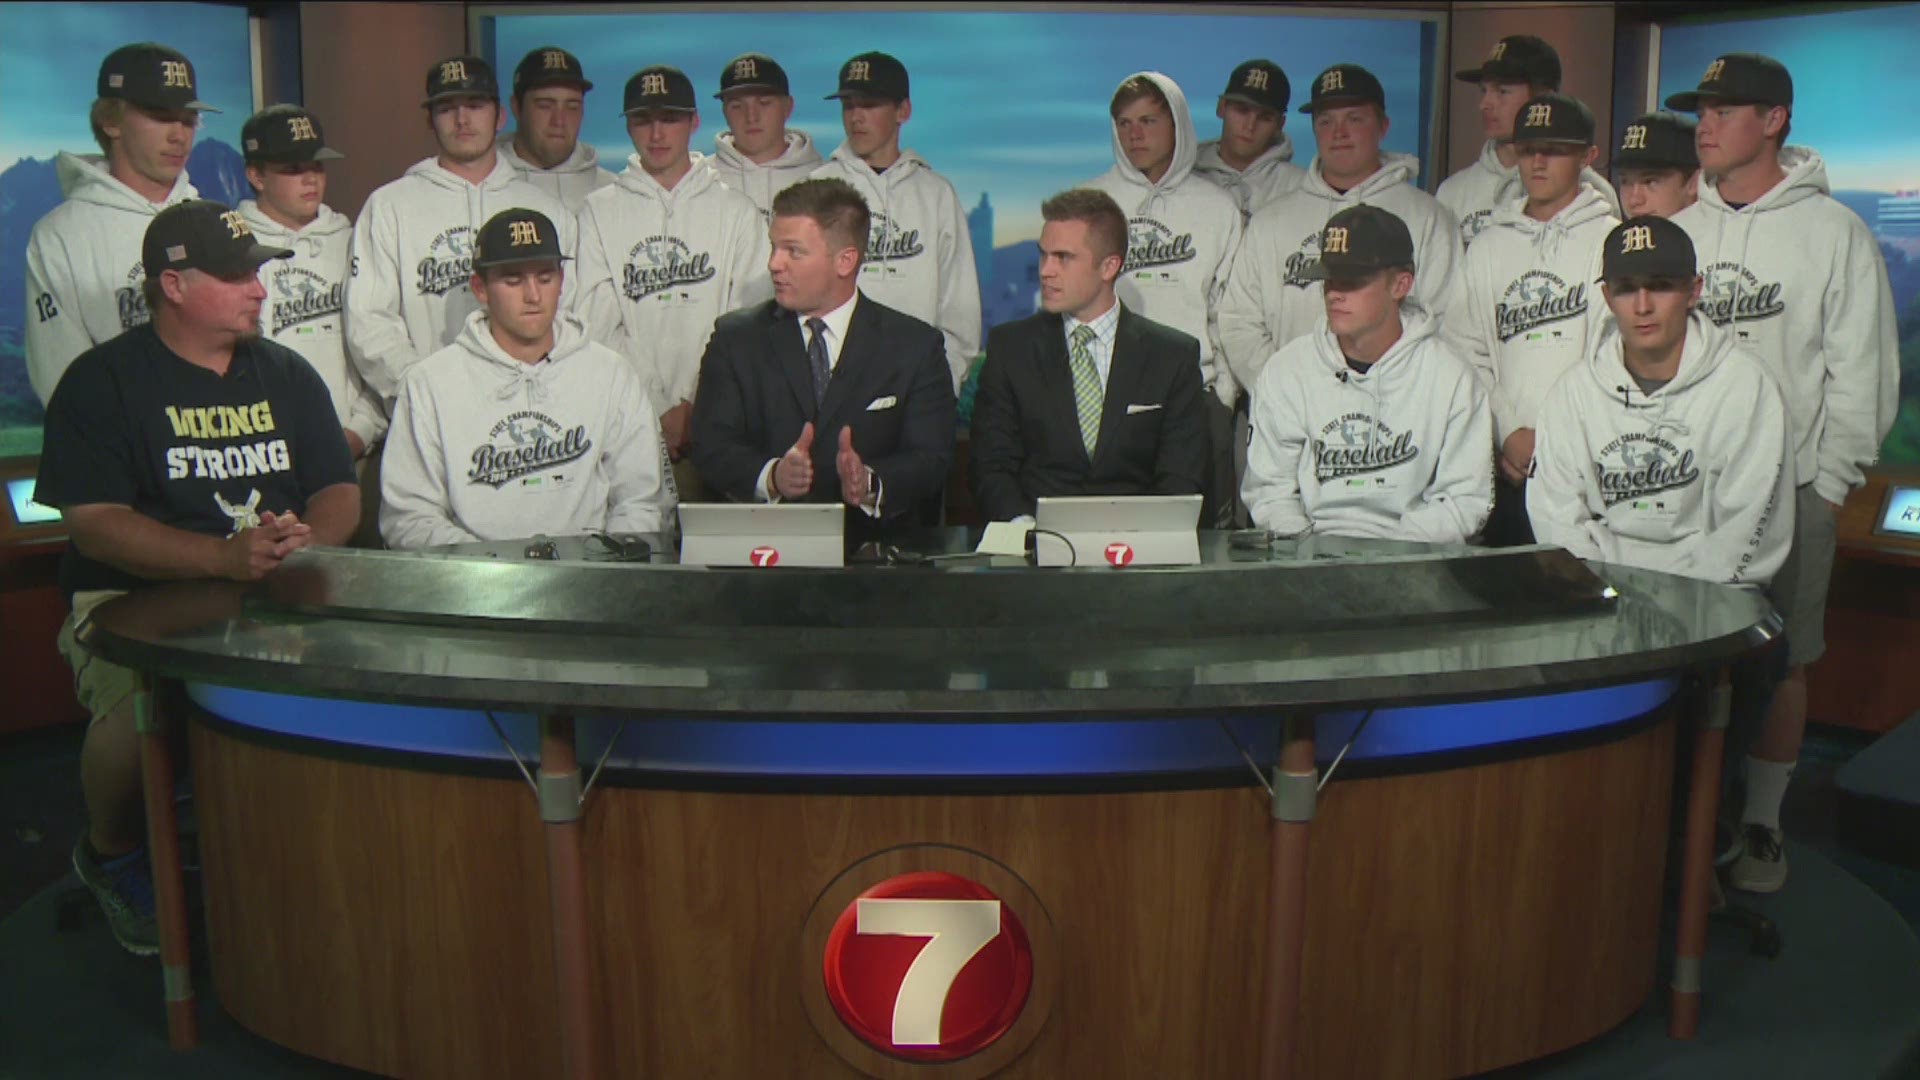 The 2018 4A state basebal champions, the Middleton Vikings, joined Jay Tust and Will Hall on set for Sunday Sports Extra.